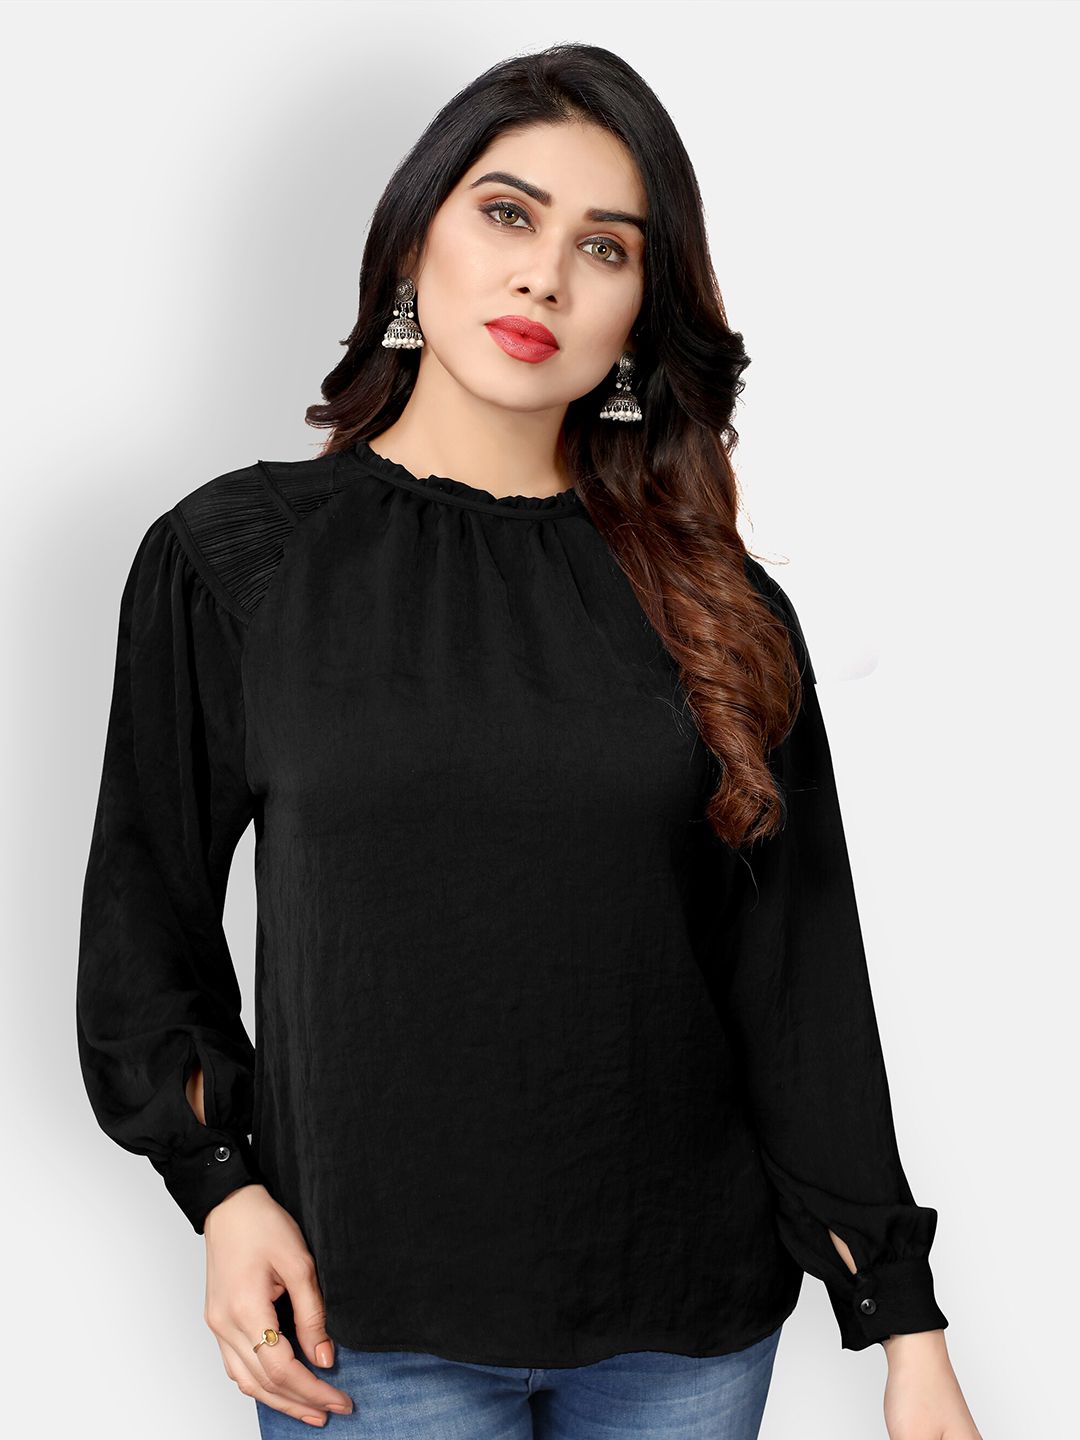 Mclothings Hummer Gathered Keyhole Neck Cuffed Sleeves Satin Top Price in India